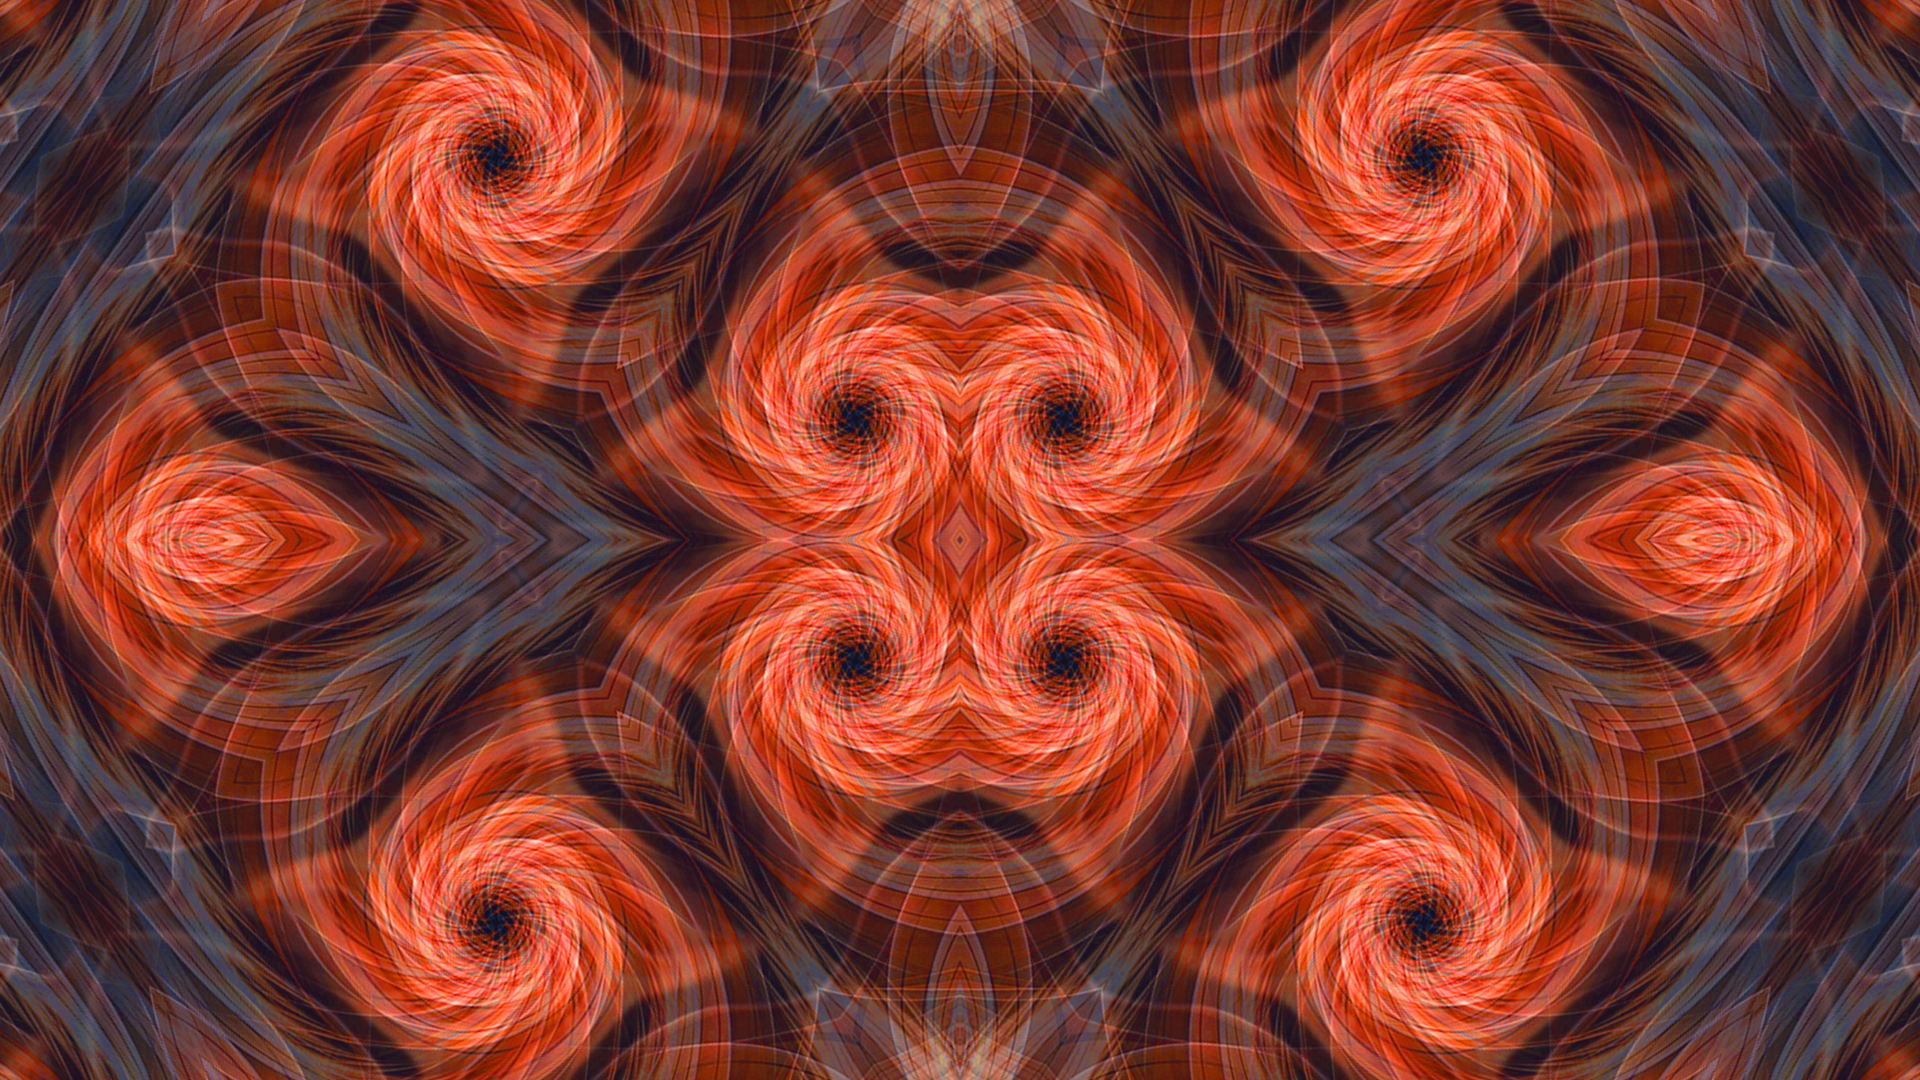 abstract, kaleidoscope, guillochis, orange (color), spiral